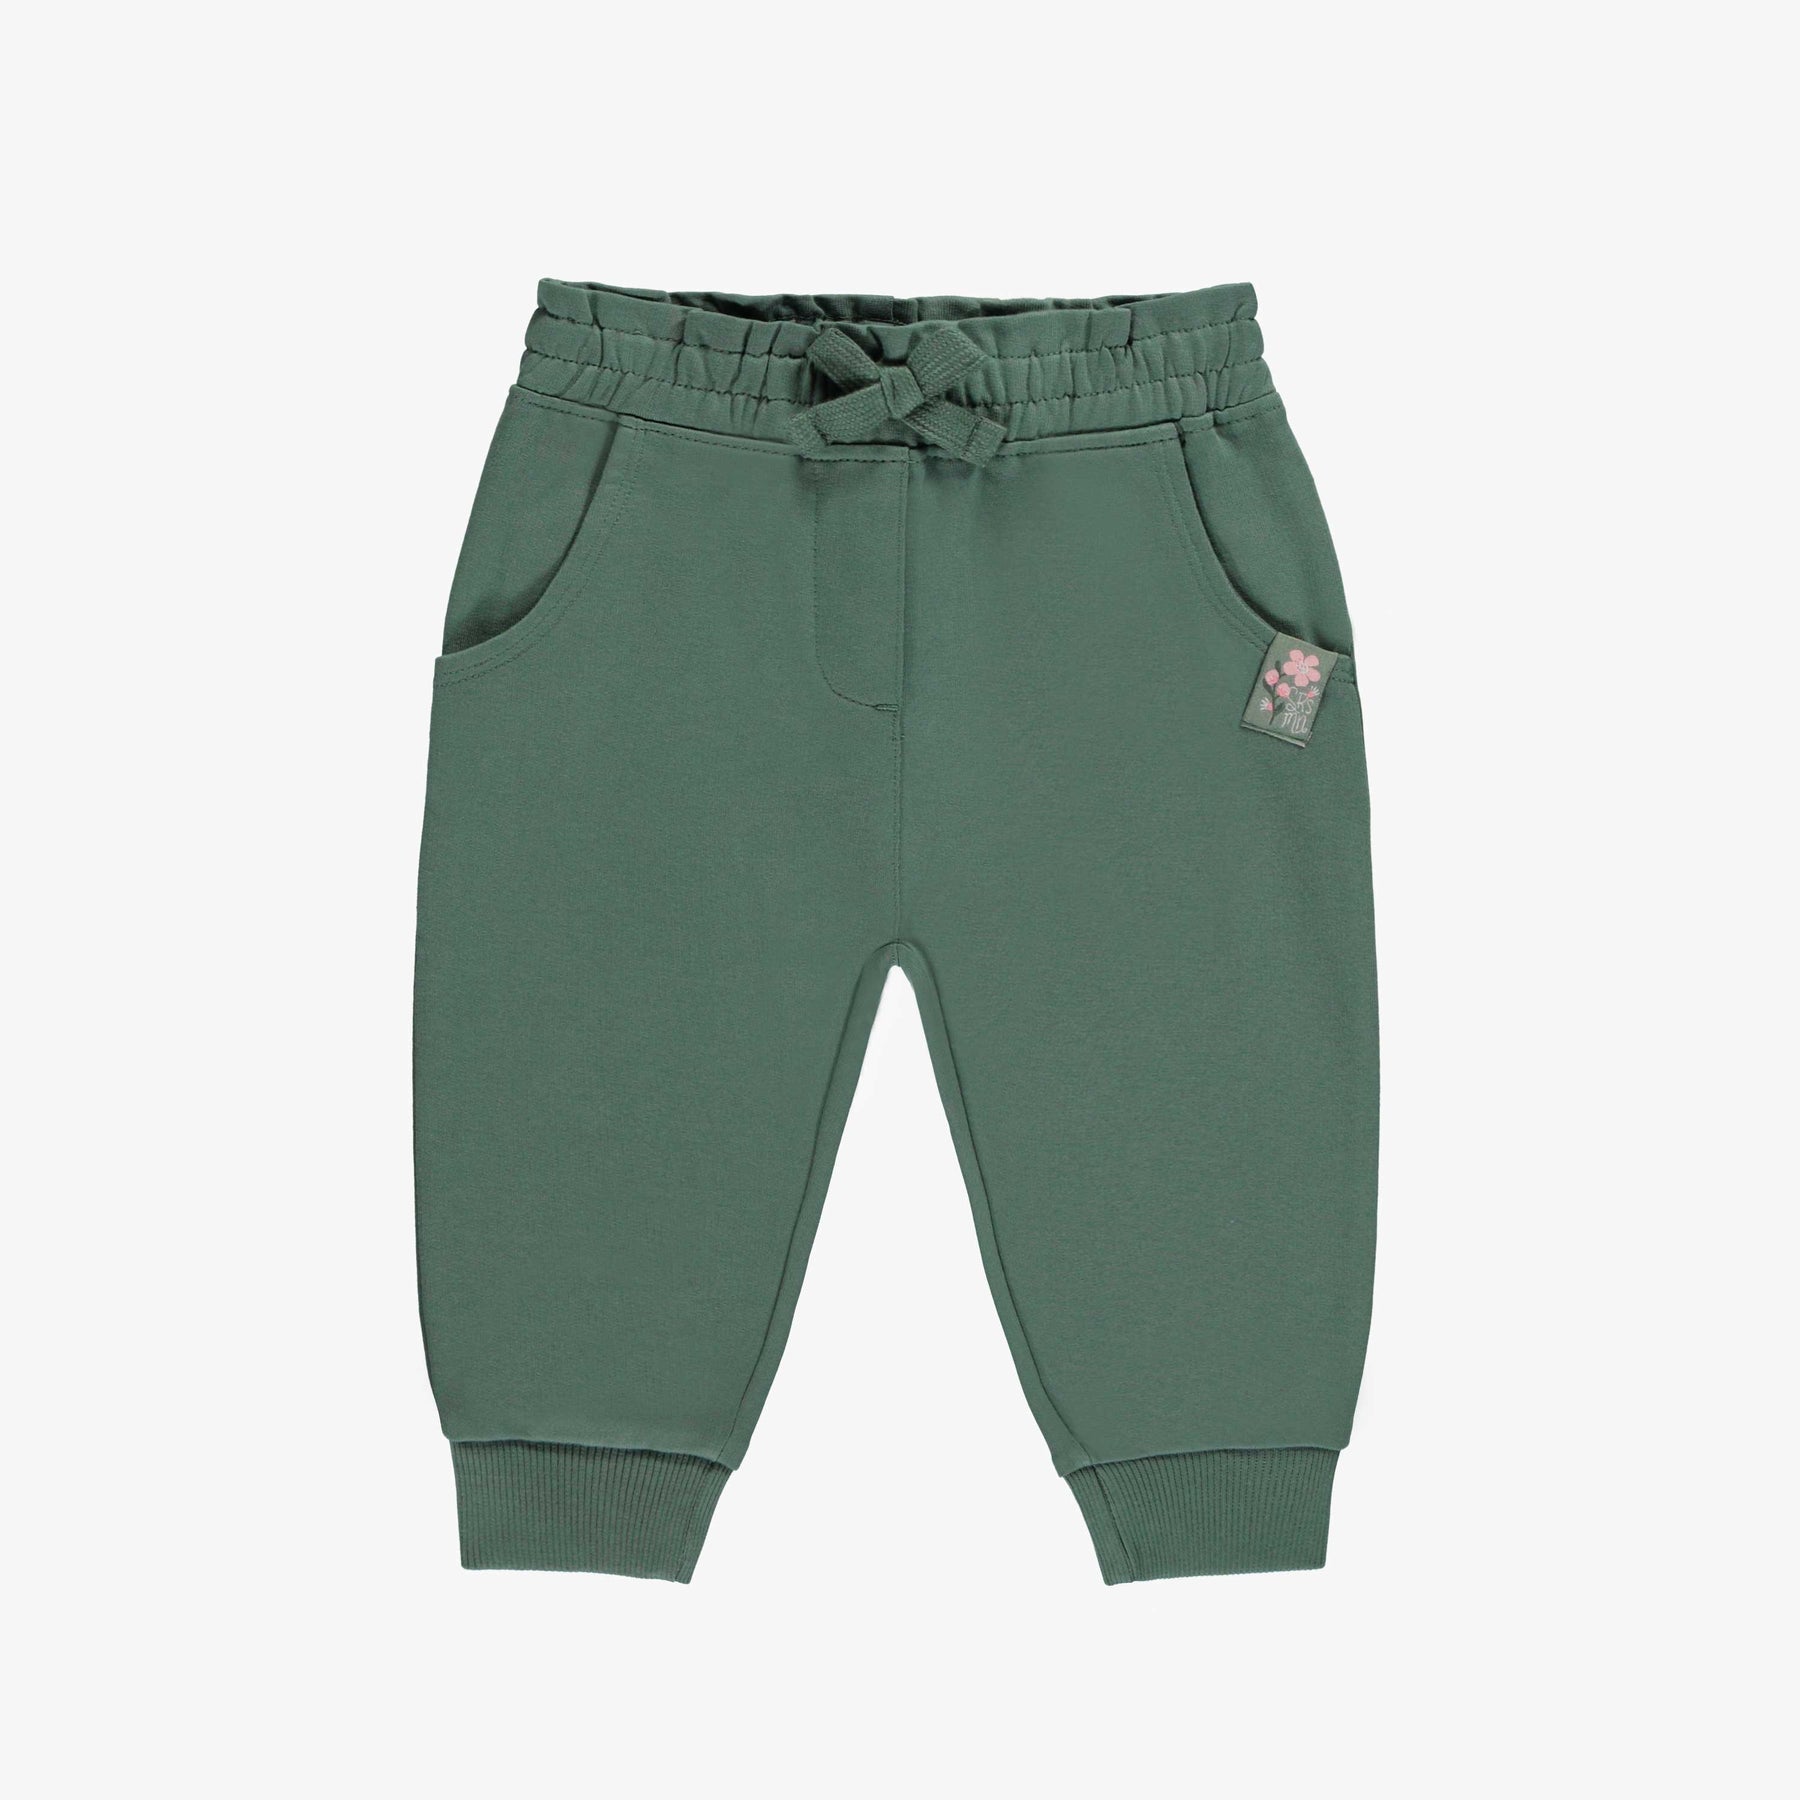 GREEN REGULAR FIT PANTS FRENCH TERRY, BABY